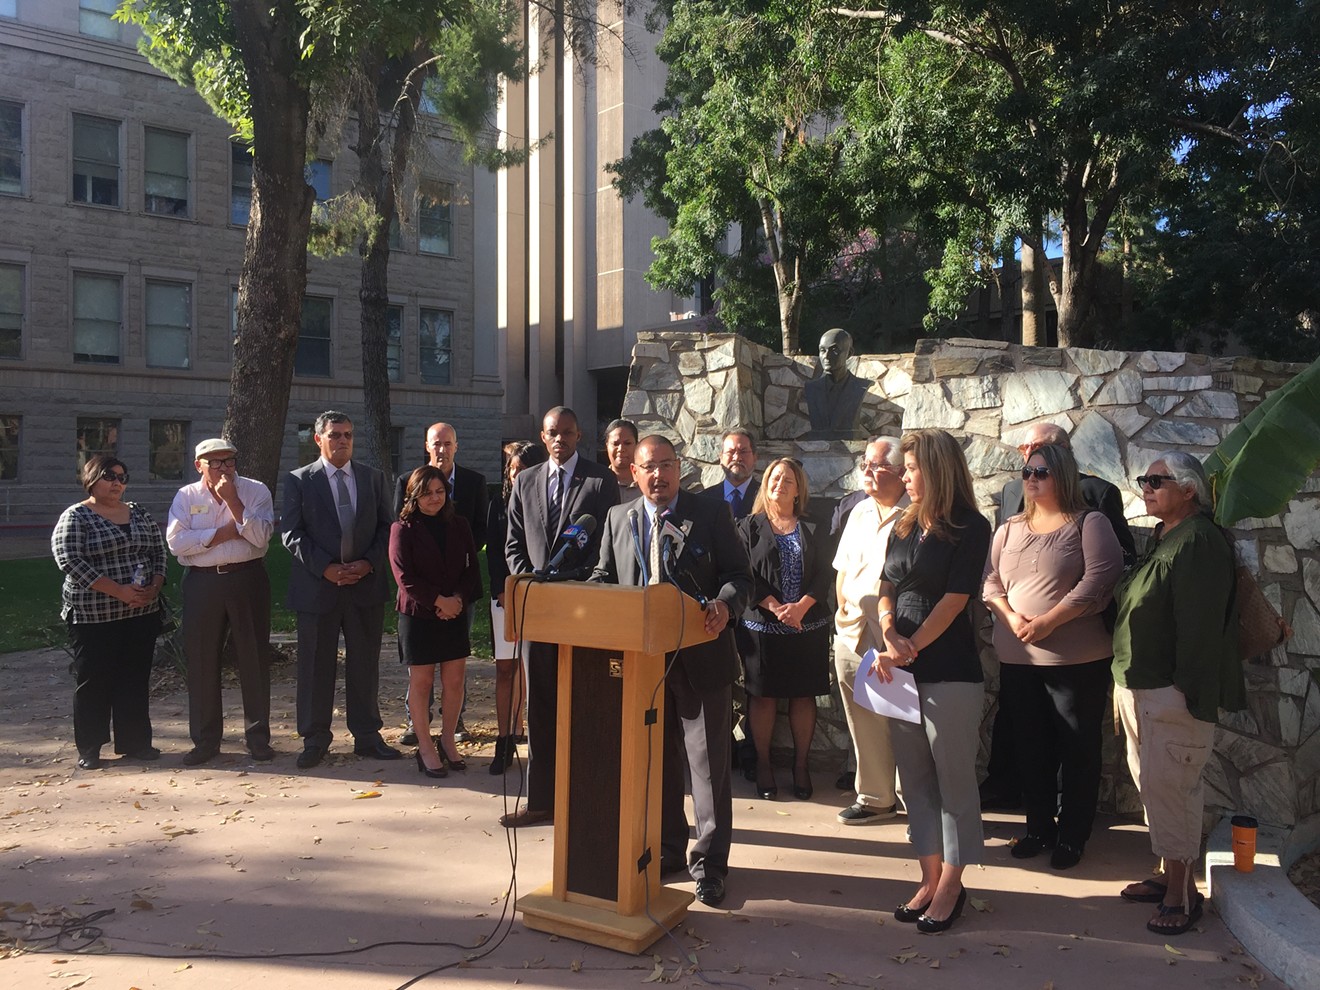 Maricopa County Supervisor Steve Gallardo speaks at a press conference featuring South Phoenix community leaders.